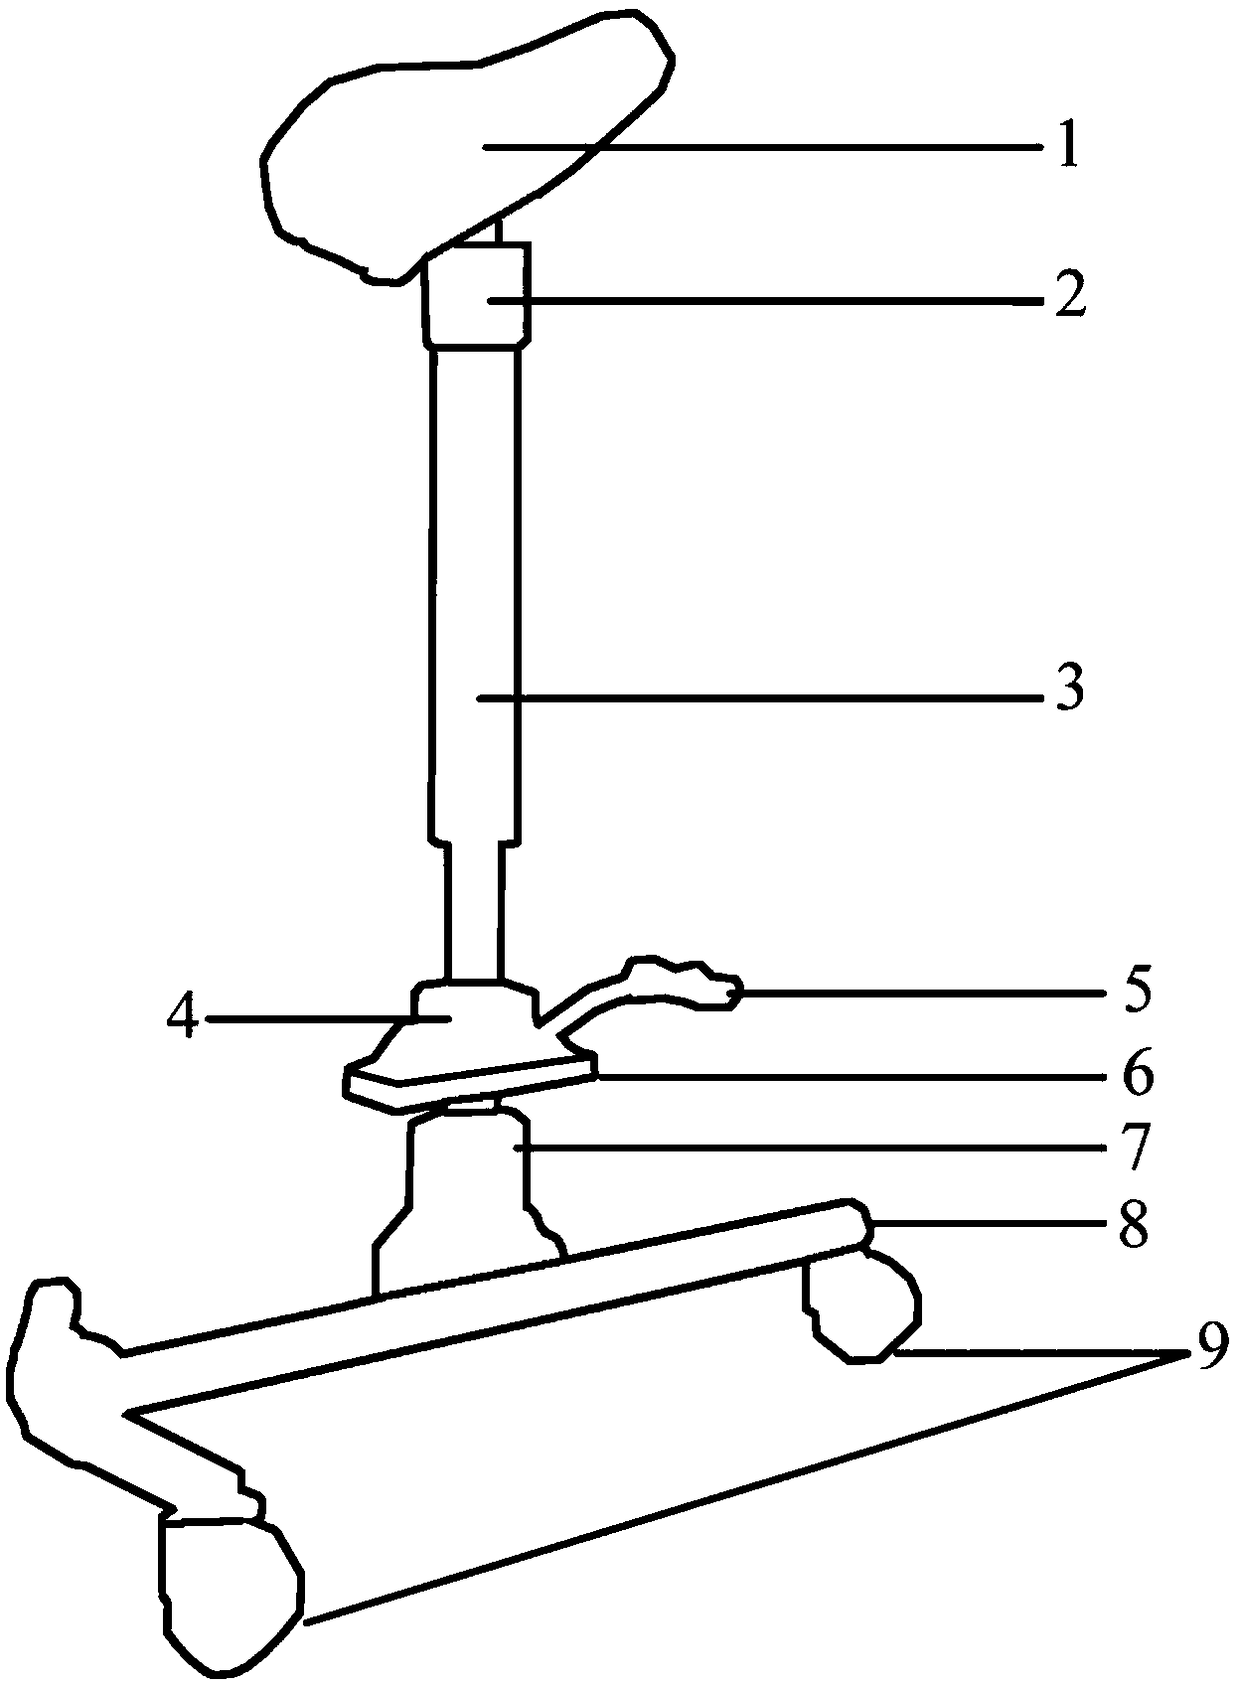 Straddle stand chair for surgical or experimental procedure and method of operating same